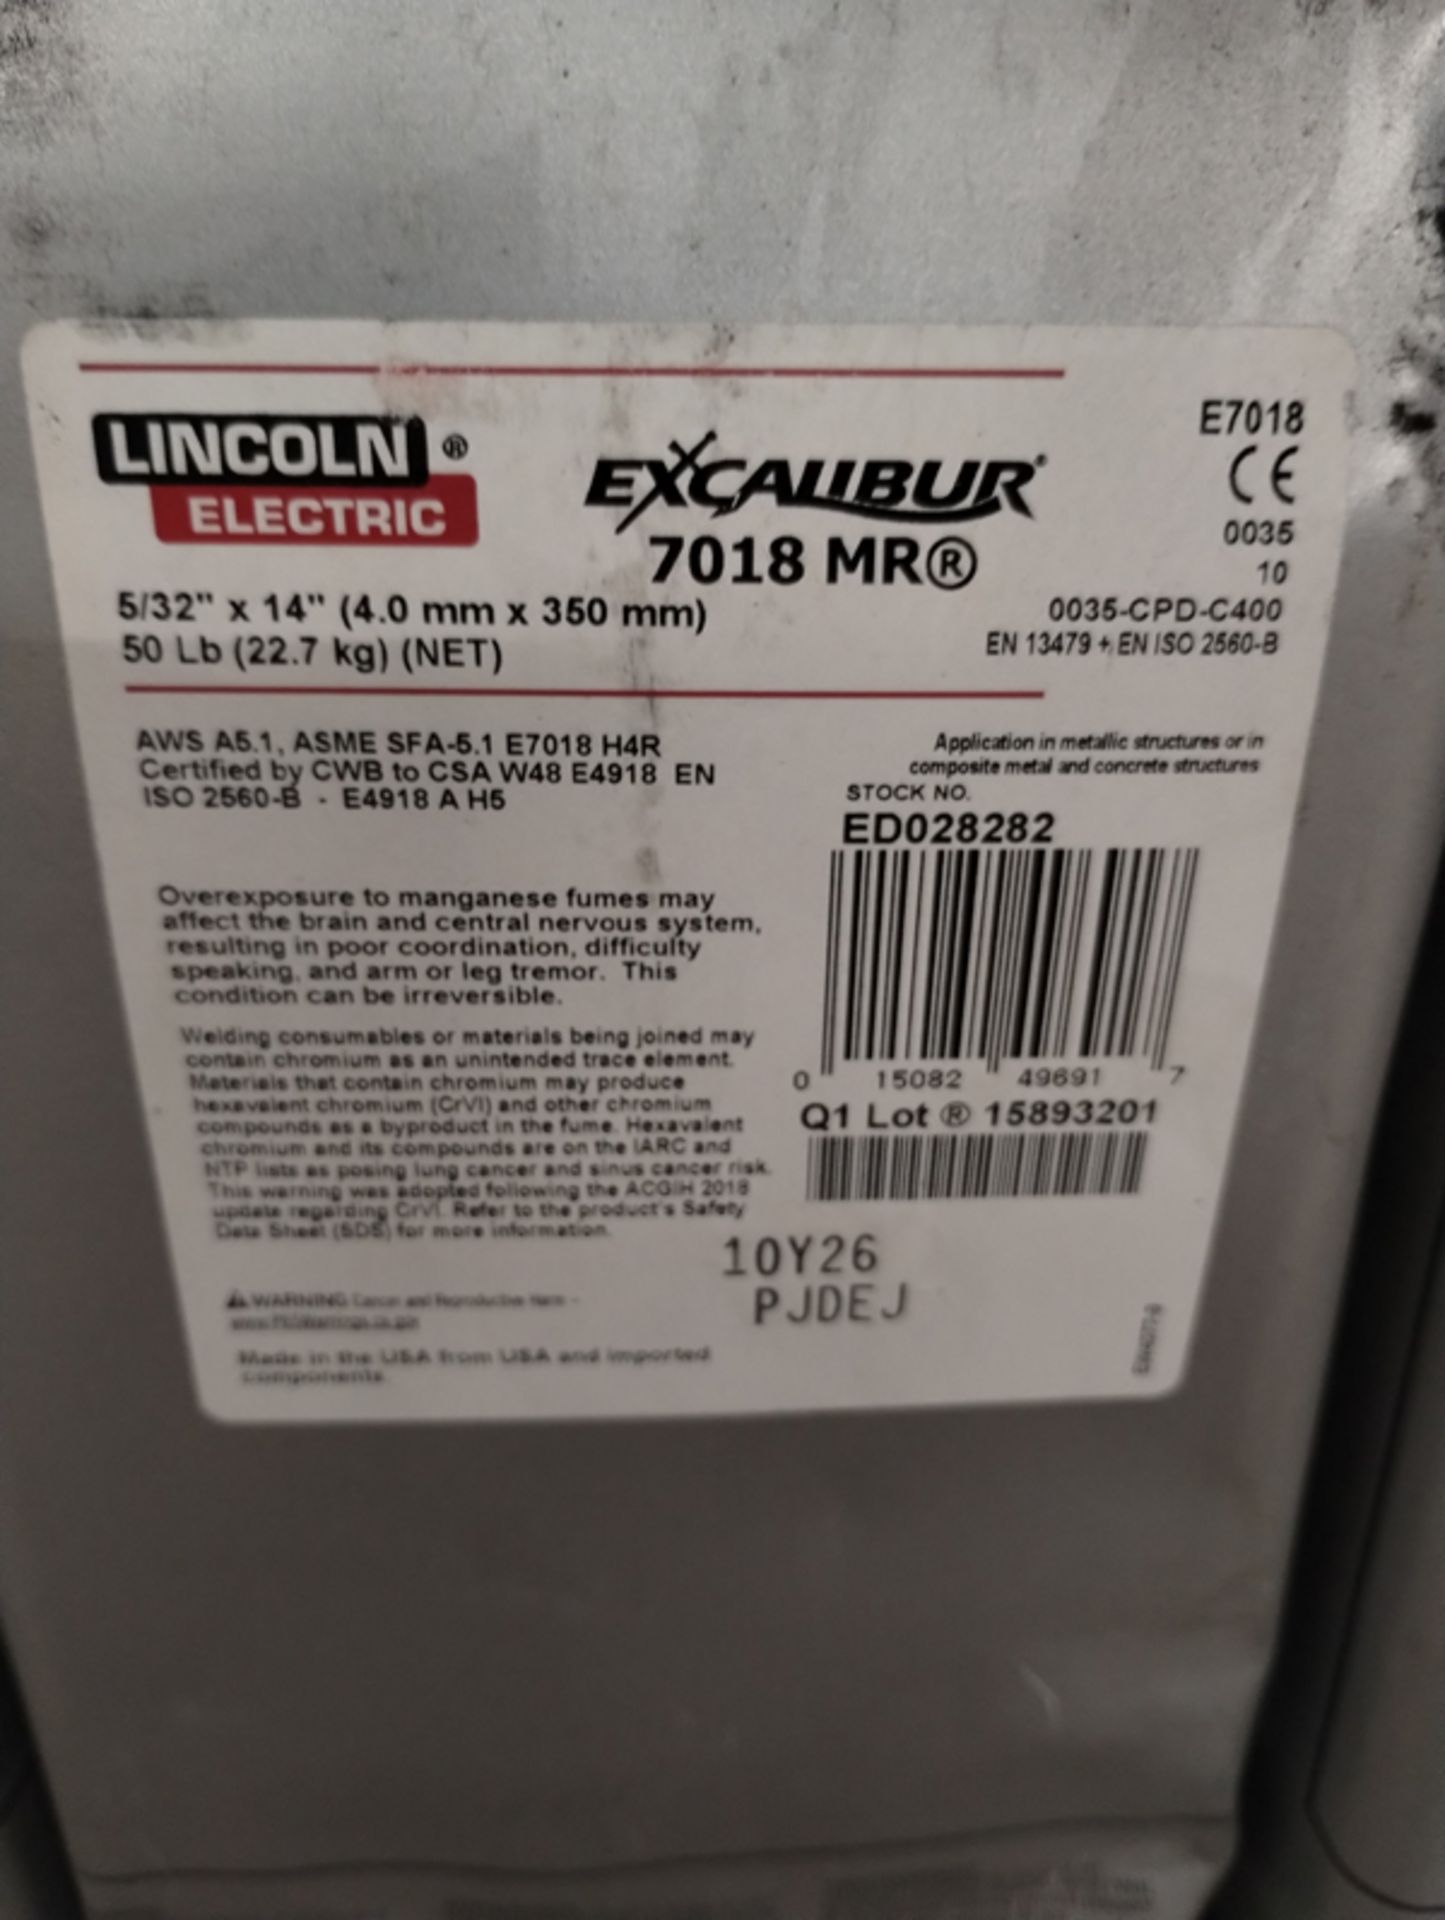 2 CANS OF LINCOLN ELECTRIC EXCALIBUR 7018 MR WELDING RODS - Image 2 of 4